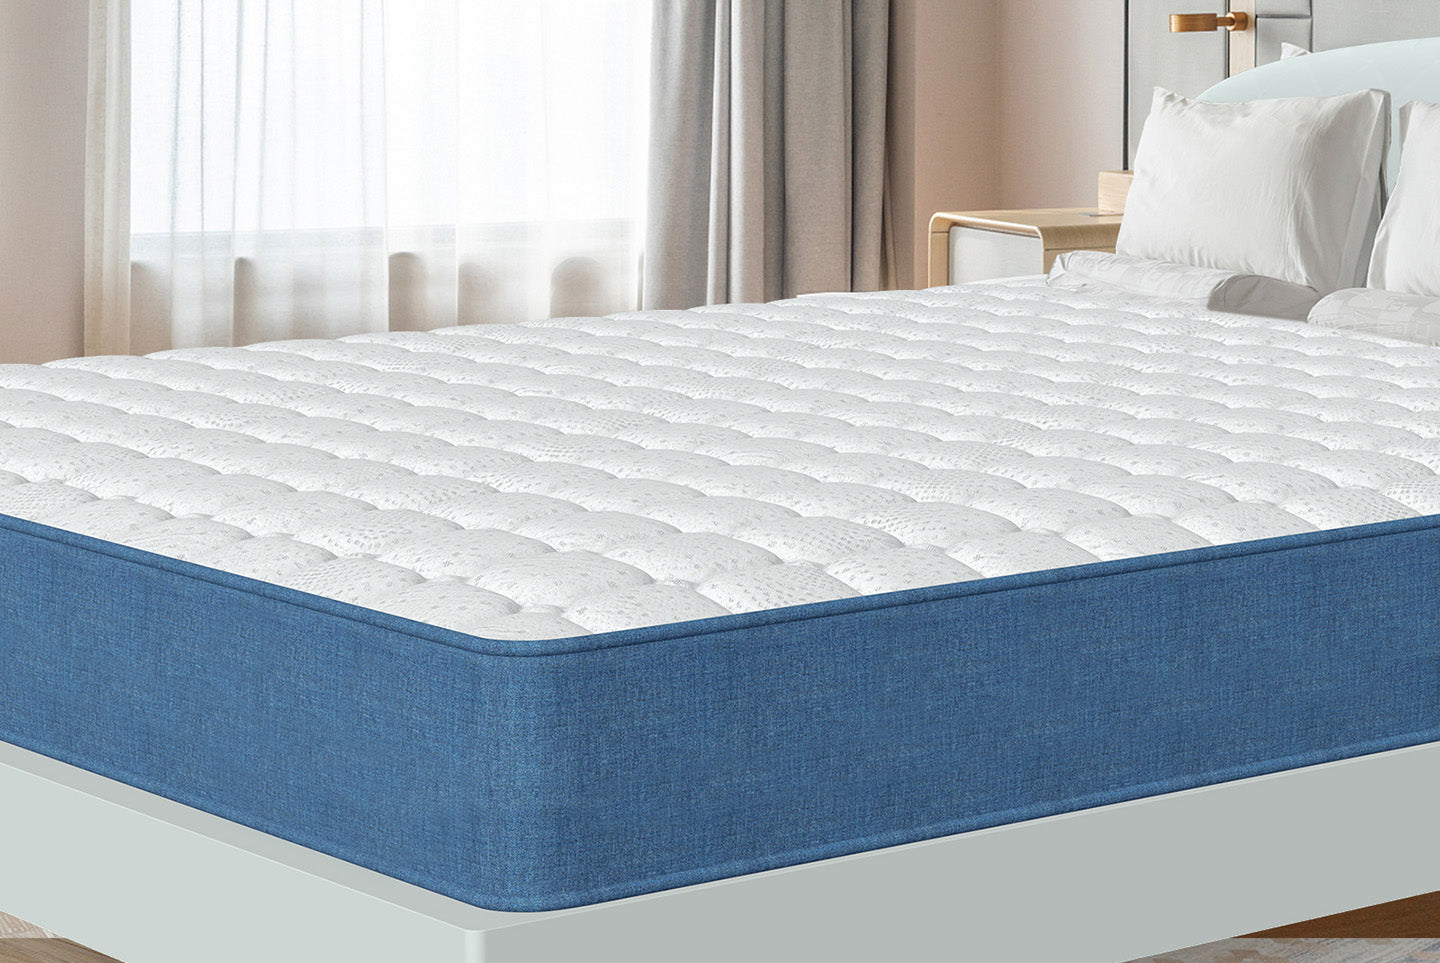 Cooling Gel Memory Foam Mattress 20CM Double-Layer Medium Firm Mattress Pressure Relief with Breathable Fabric King (150 x 200 x 20cm)